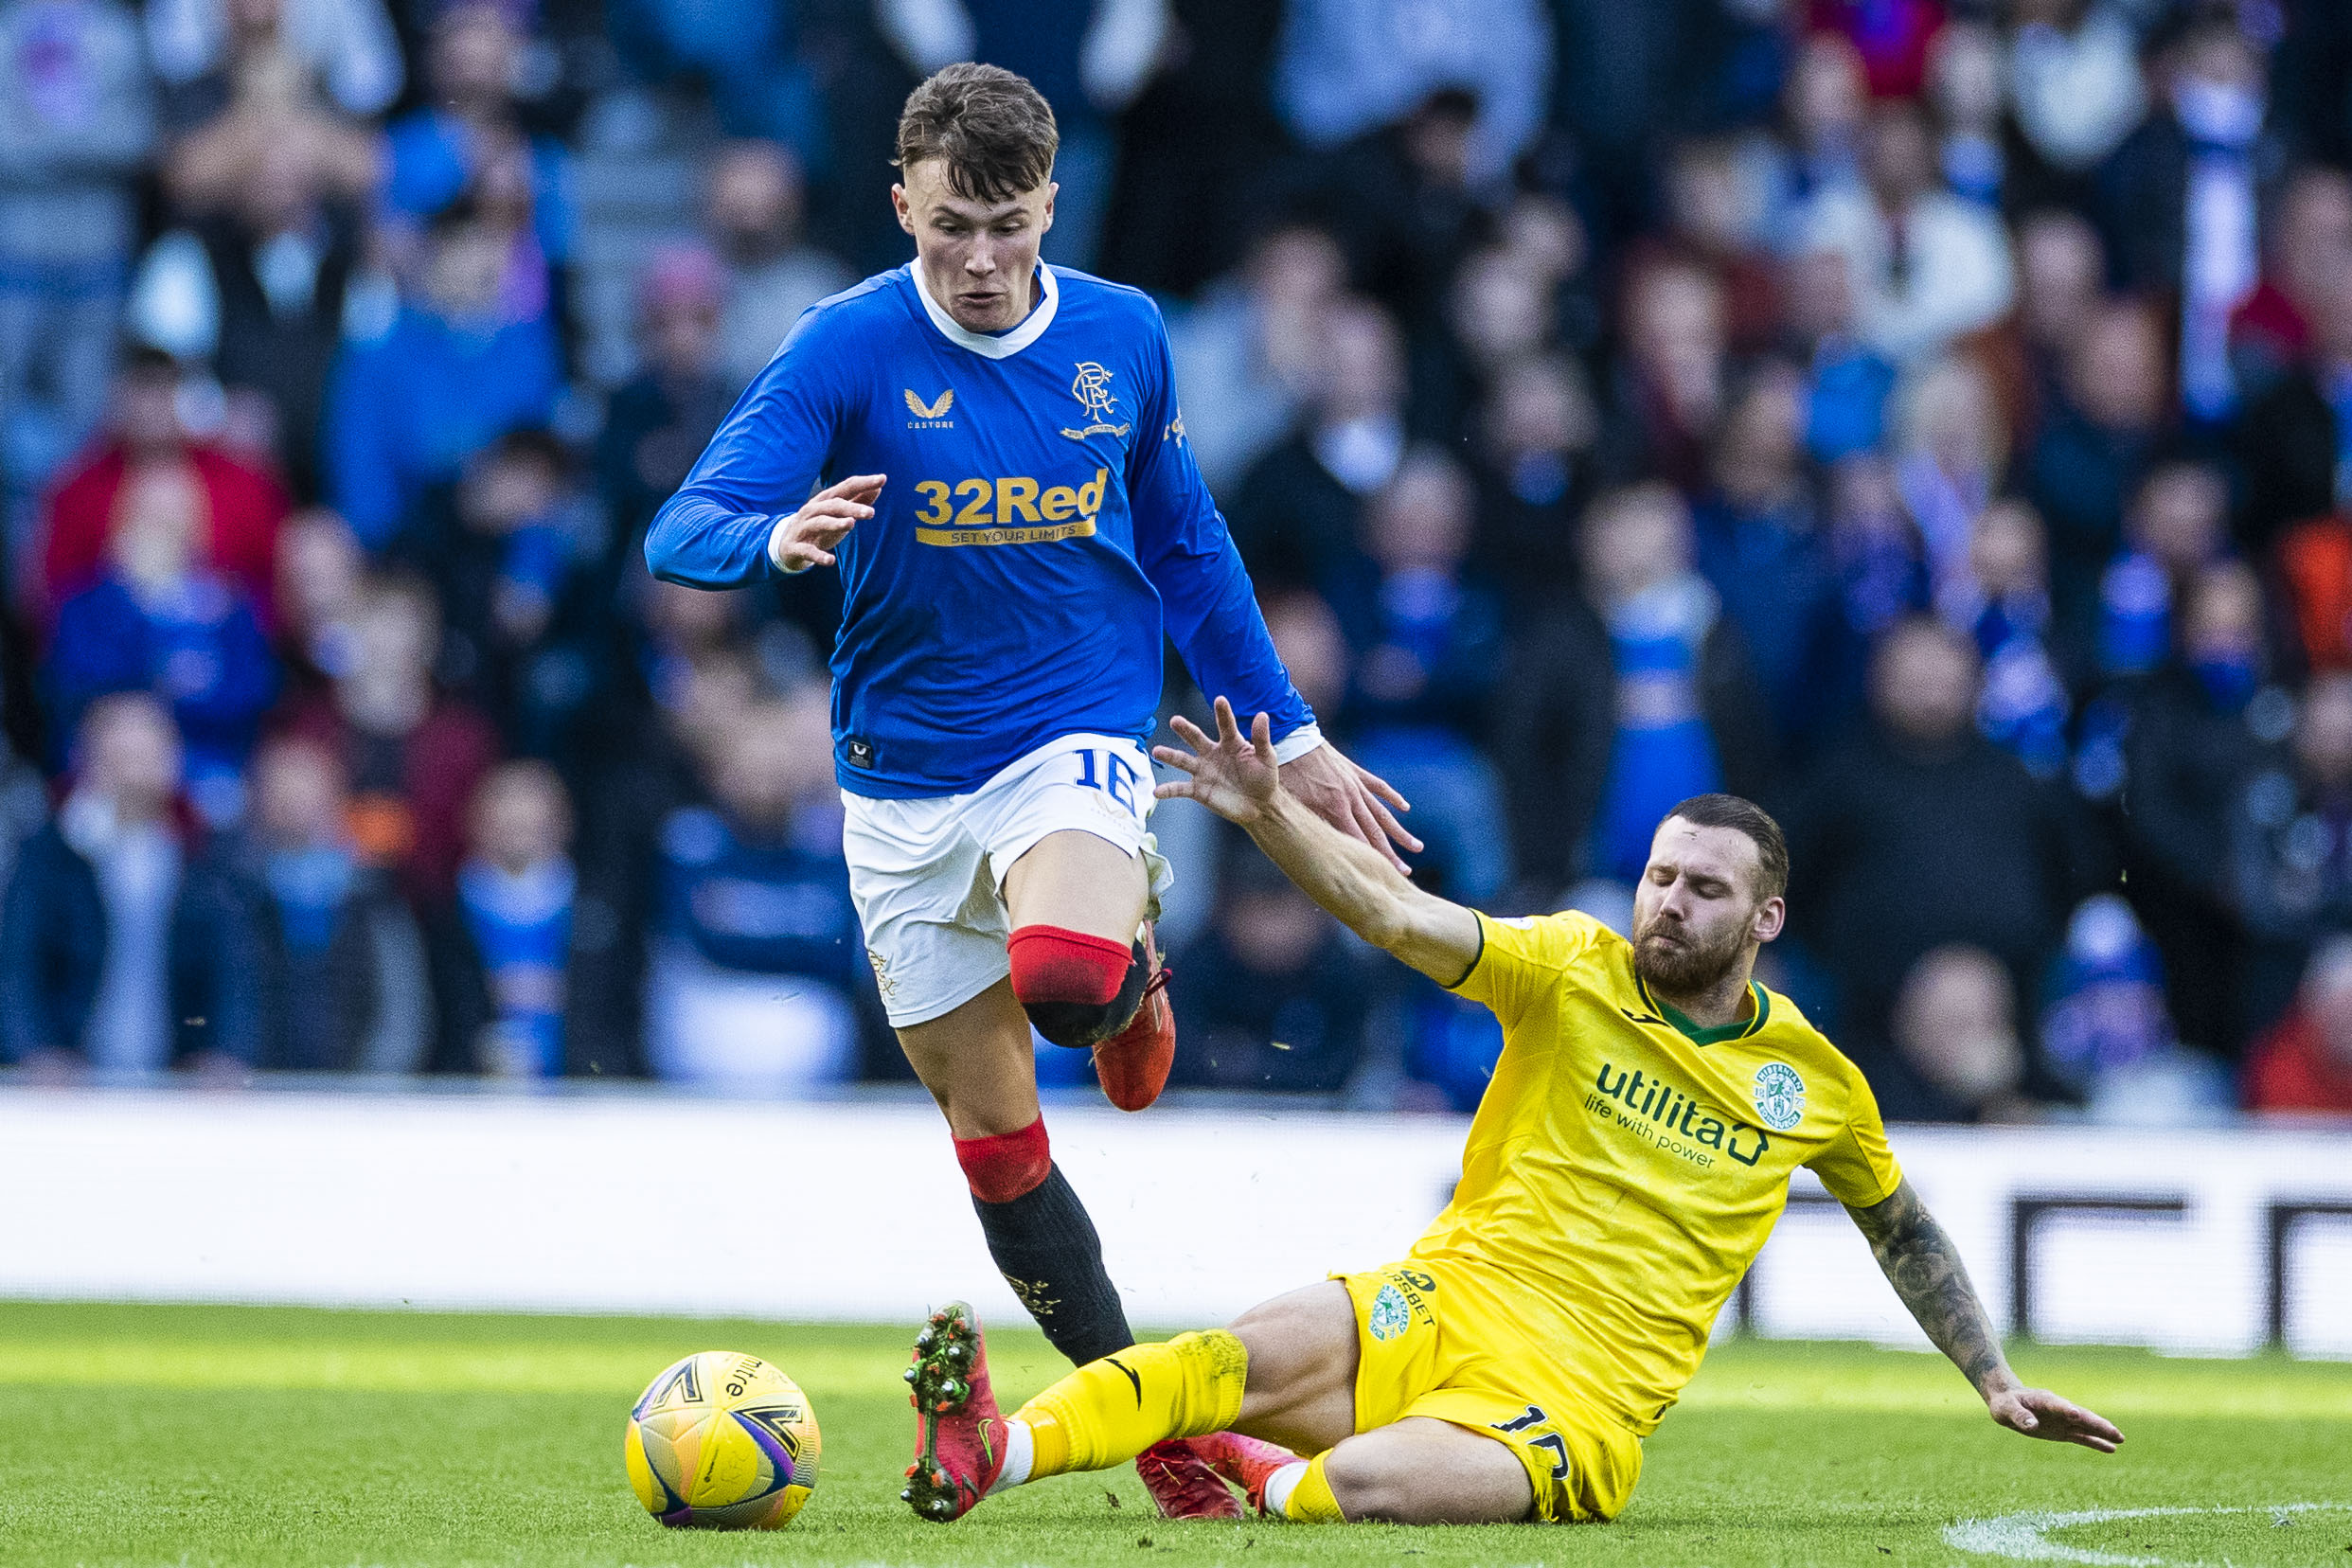 Match Report: Rangers Take The Points Against Hibs At Ibrox | Rangers Football Club